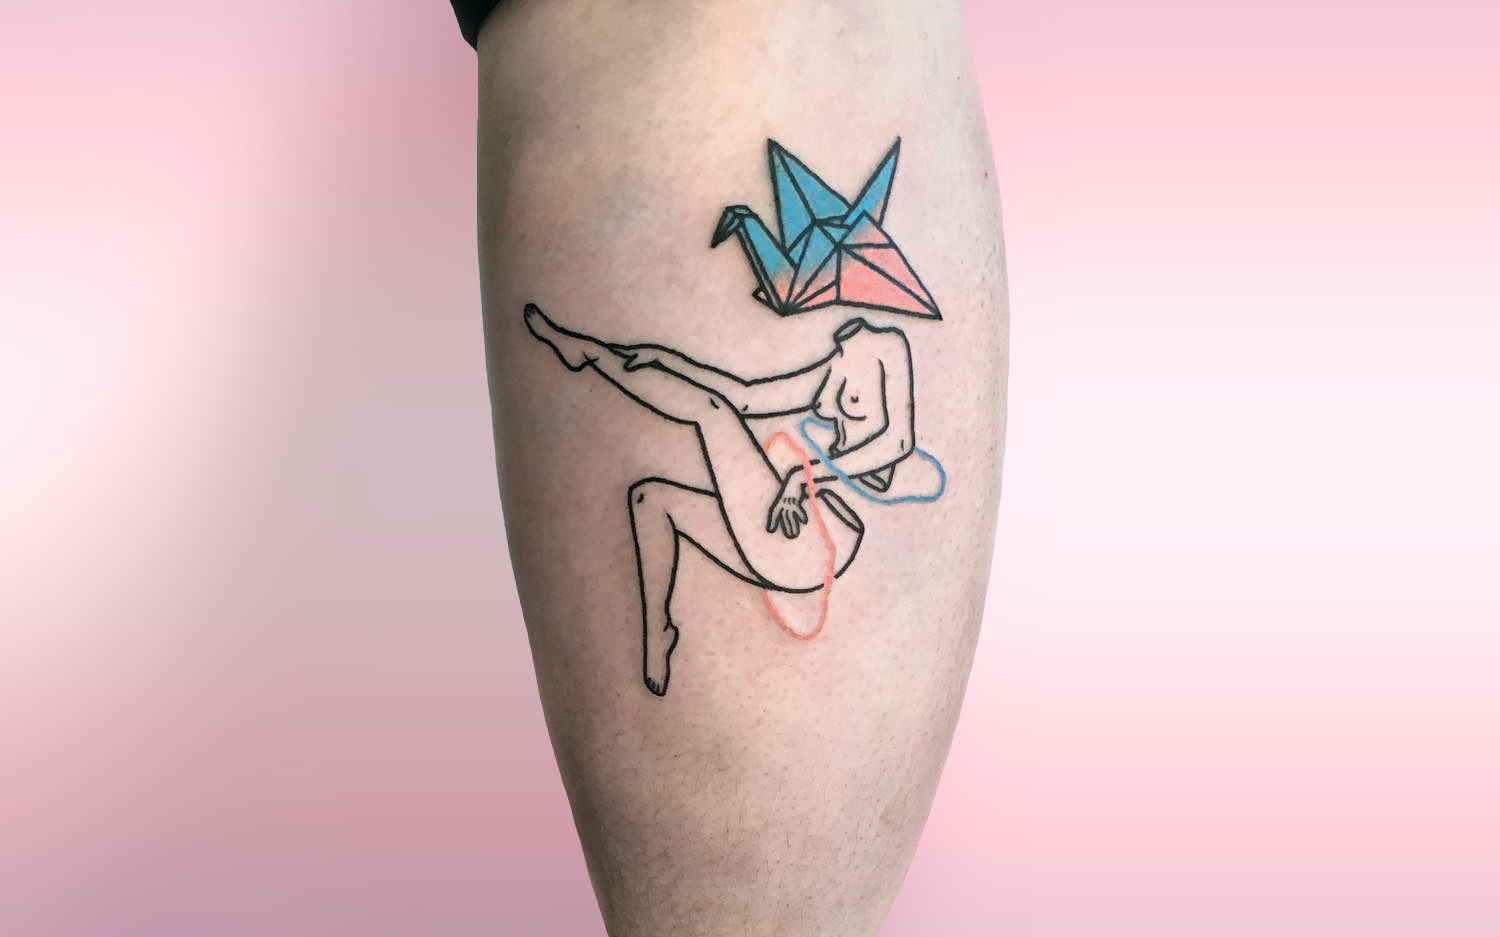 Origami figure drawing tattoo by Blaabad